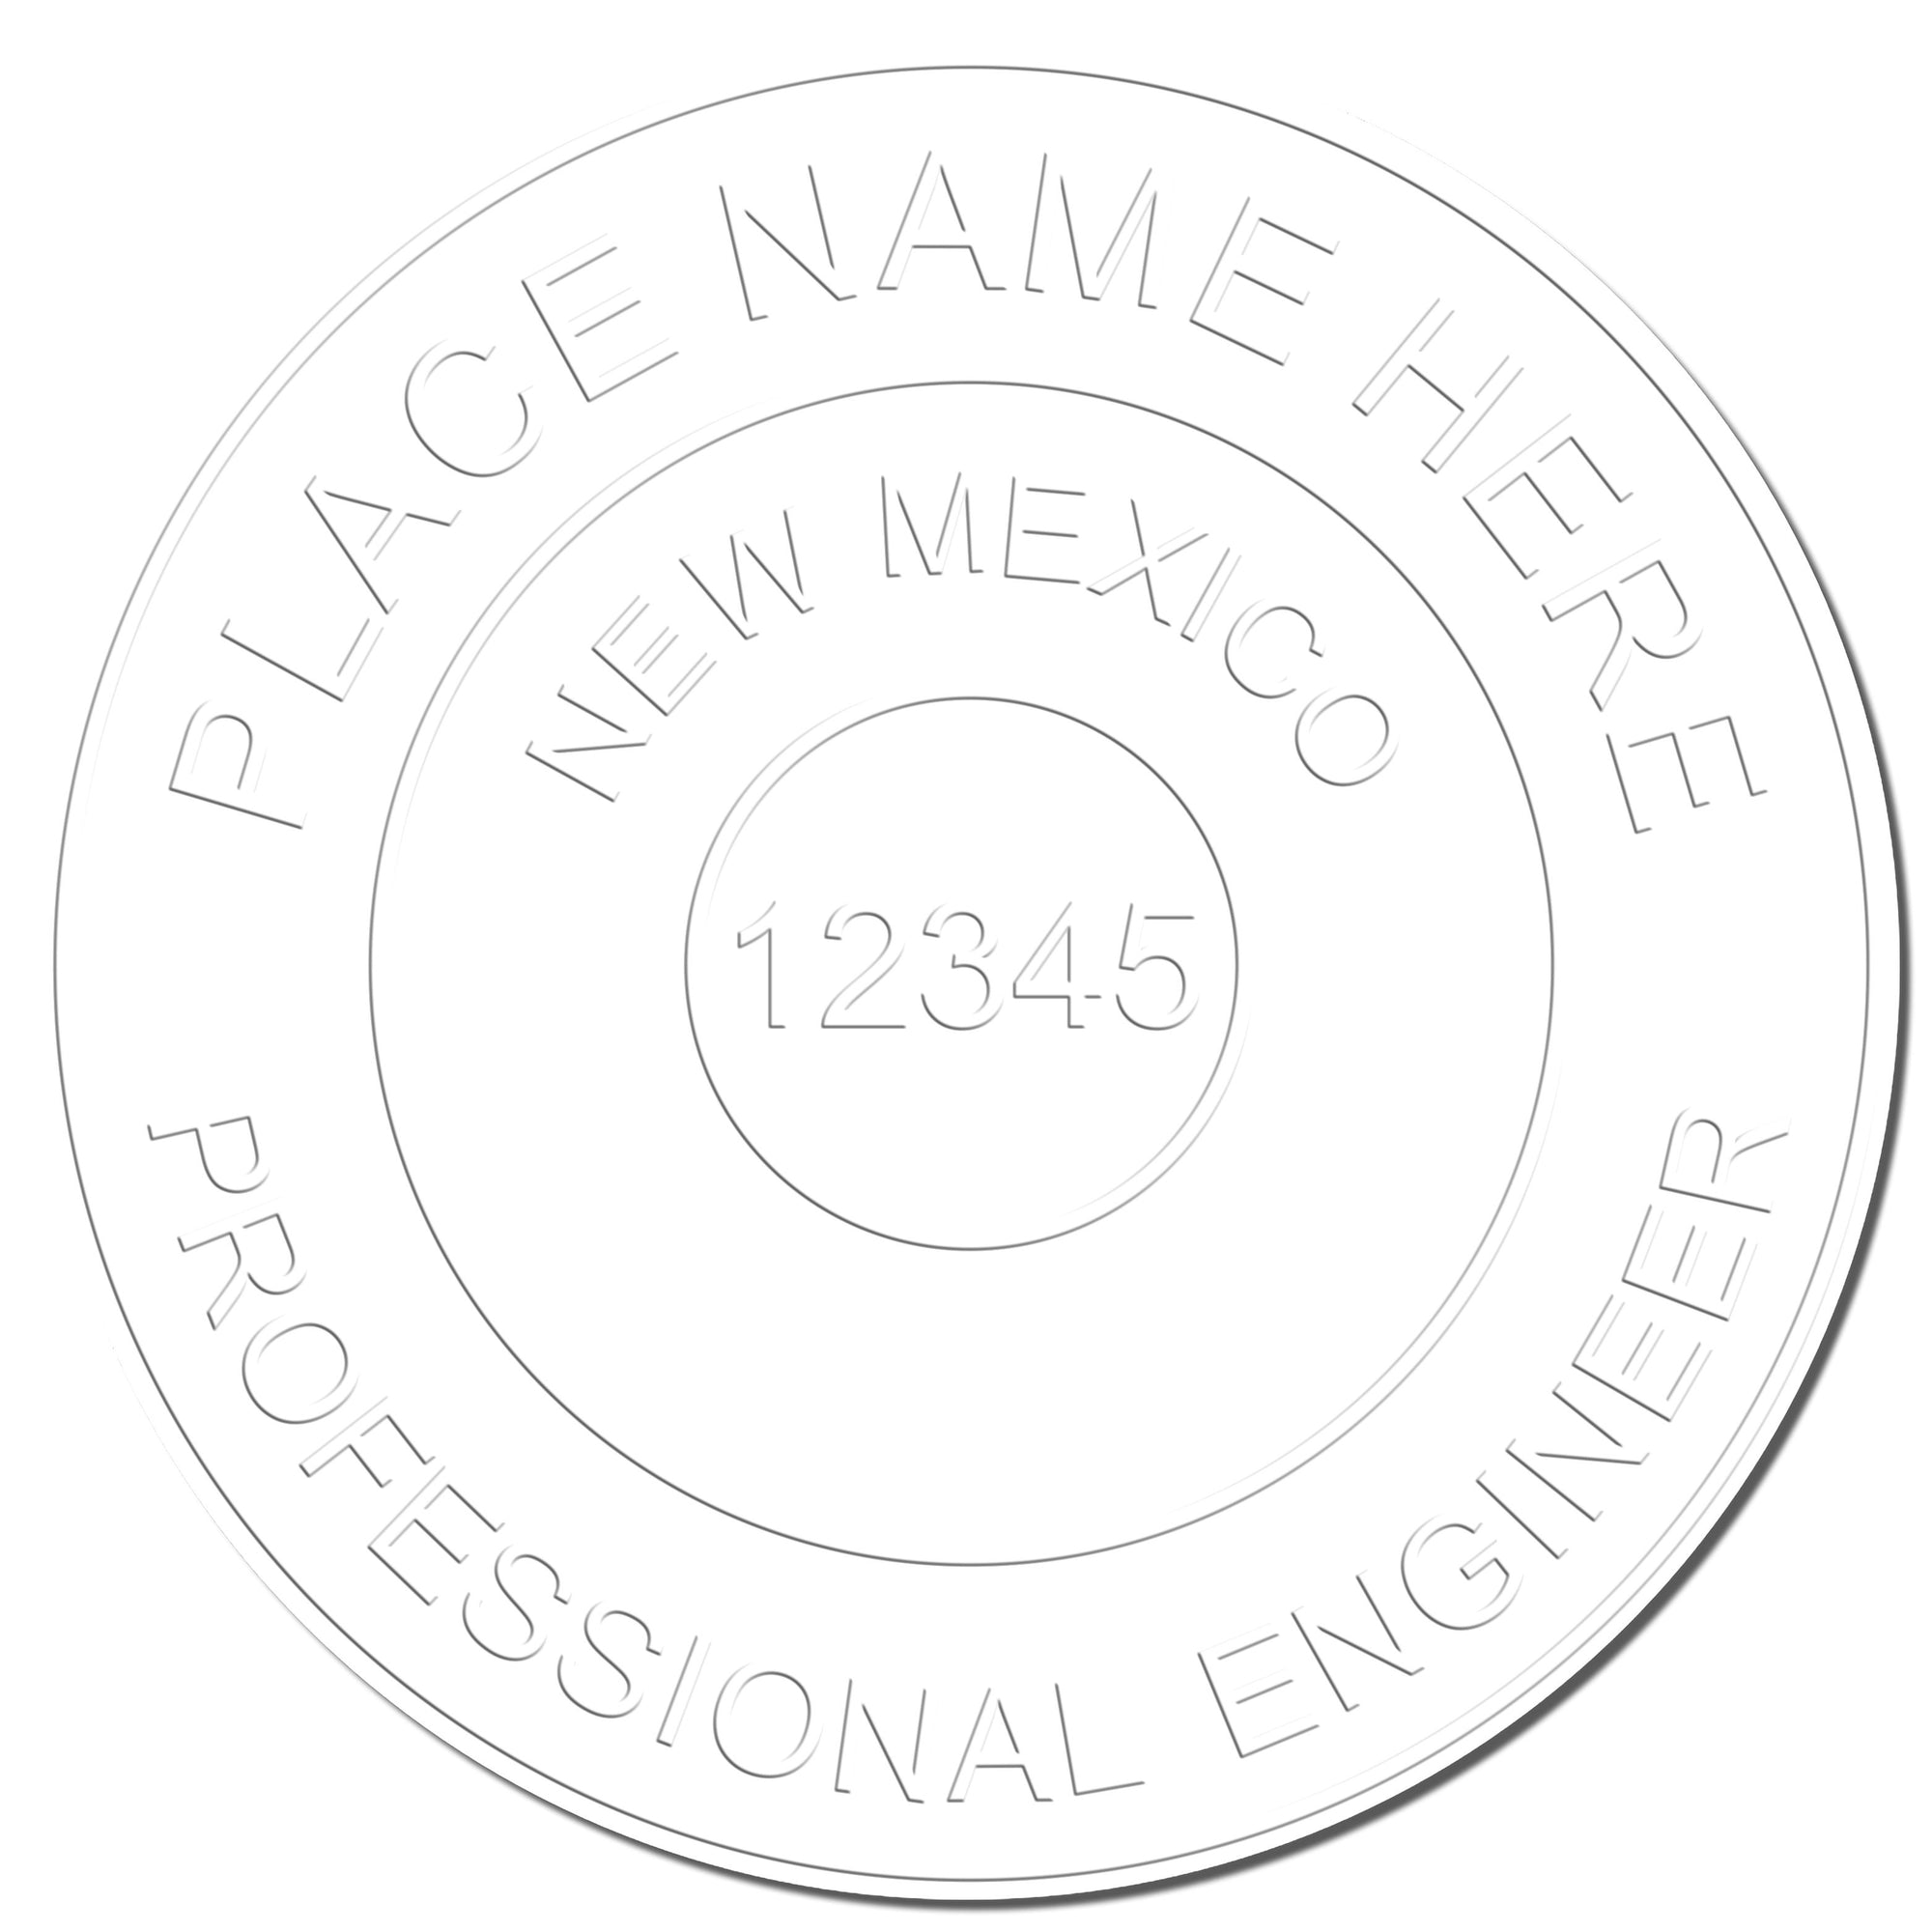 The main image for the New Mexico Engineer Desk Seal depicting a sample of the imprint and electronic files